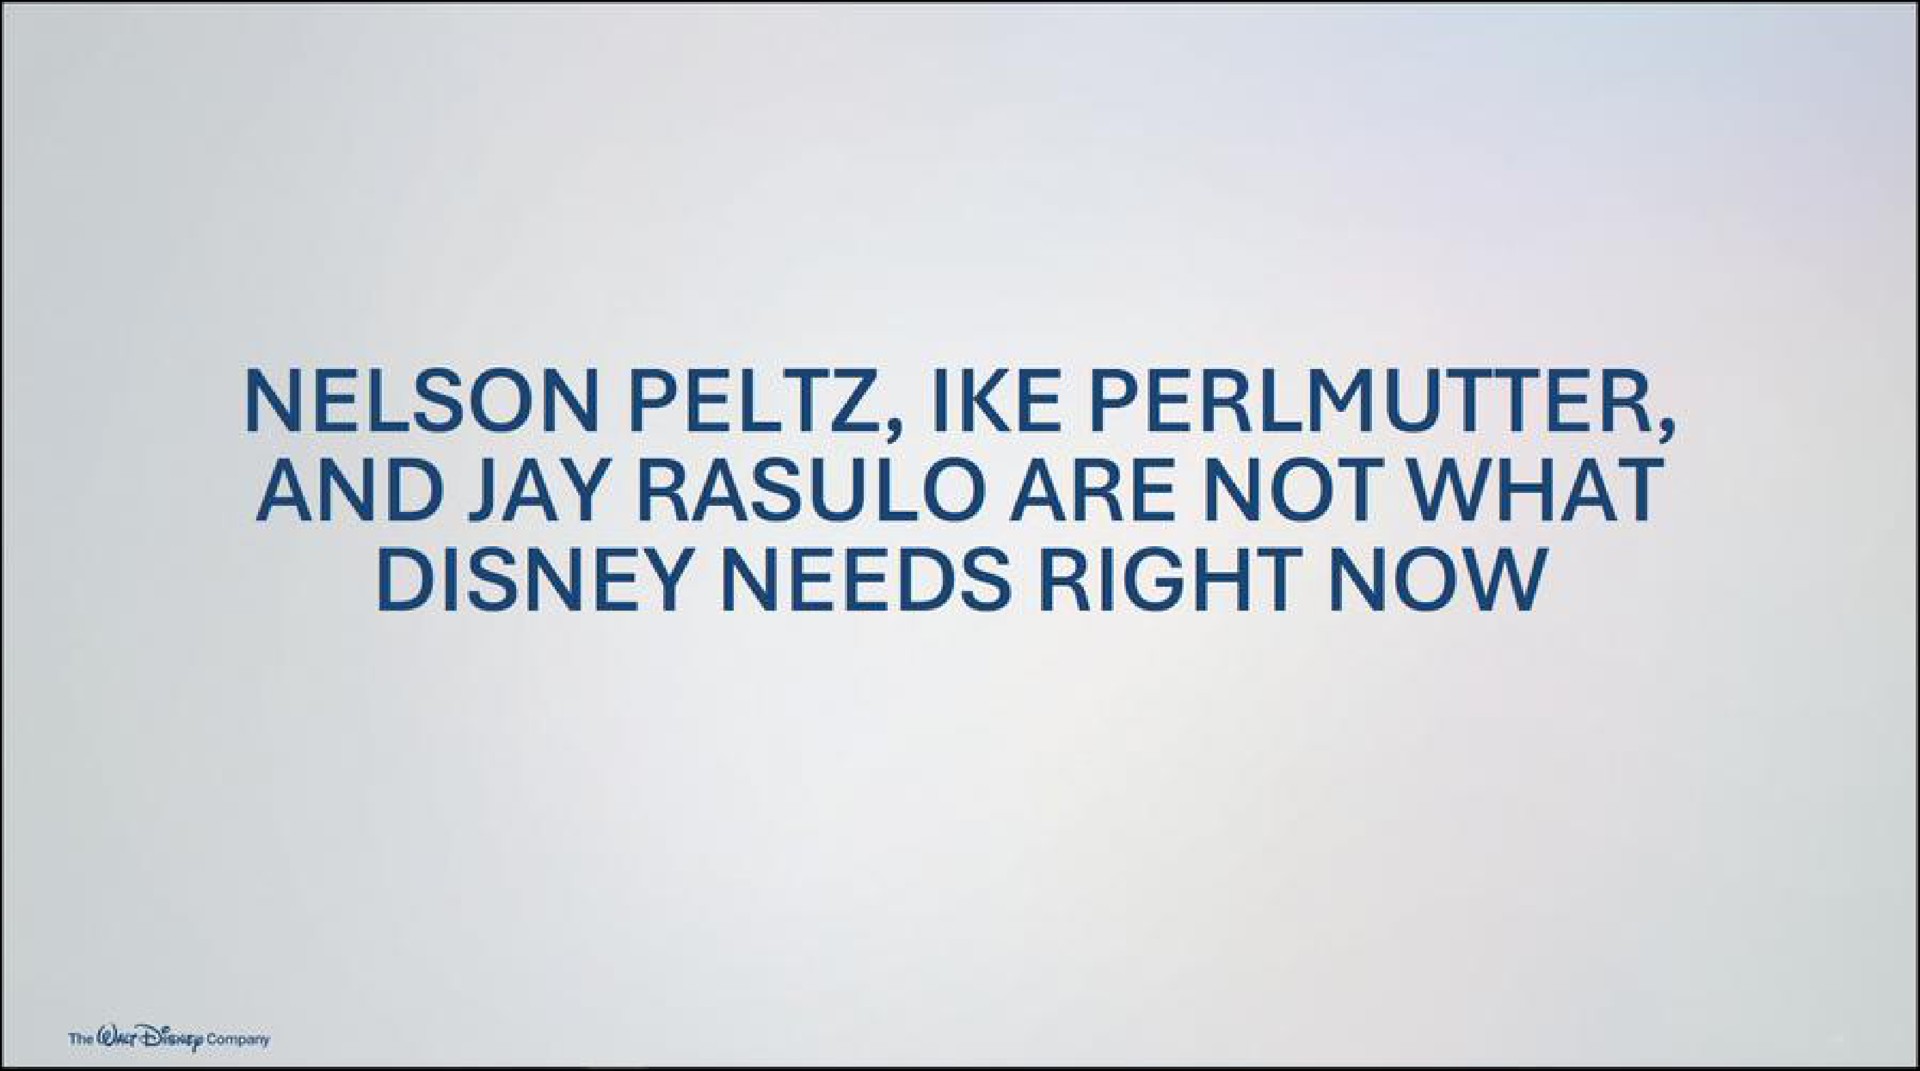 nelson and jay are not what needs right now | Disney